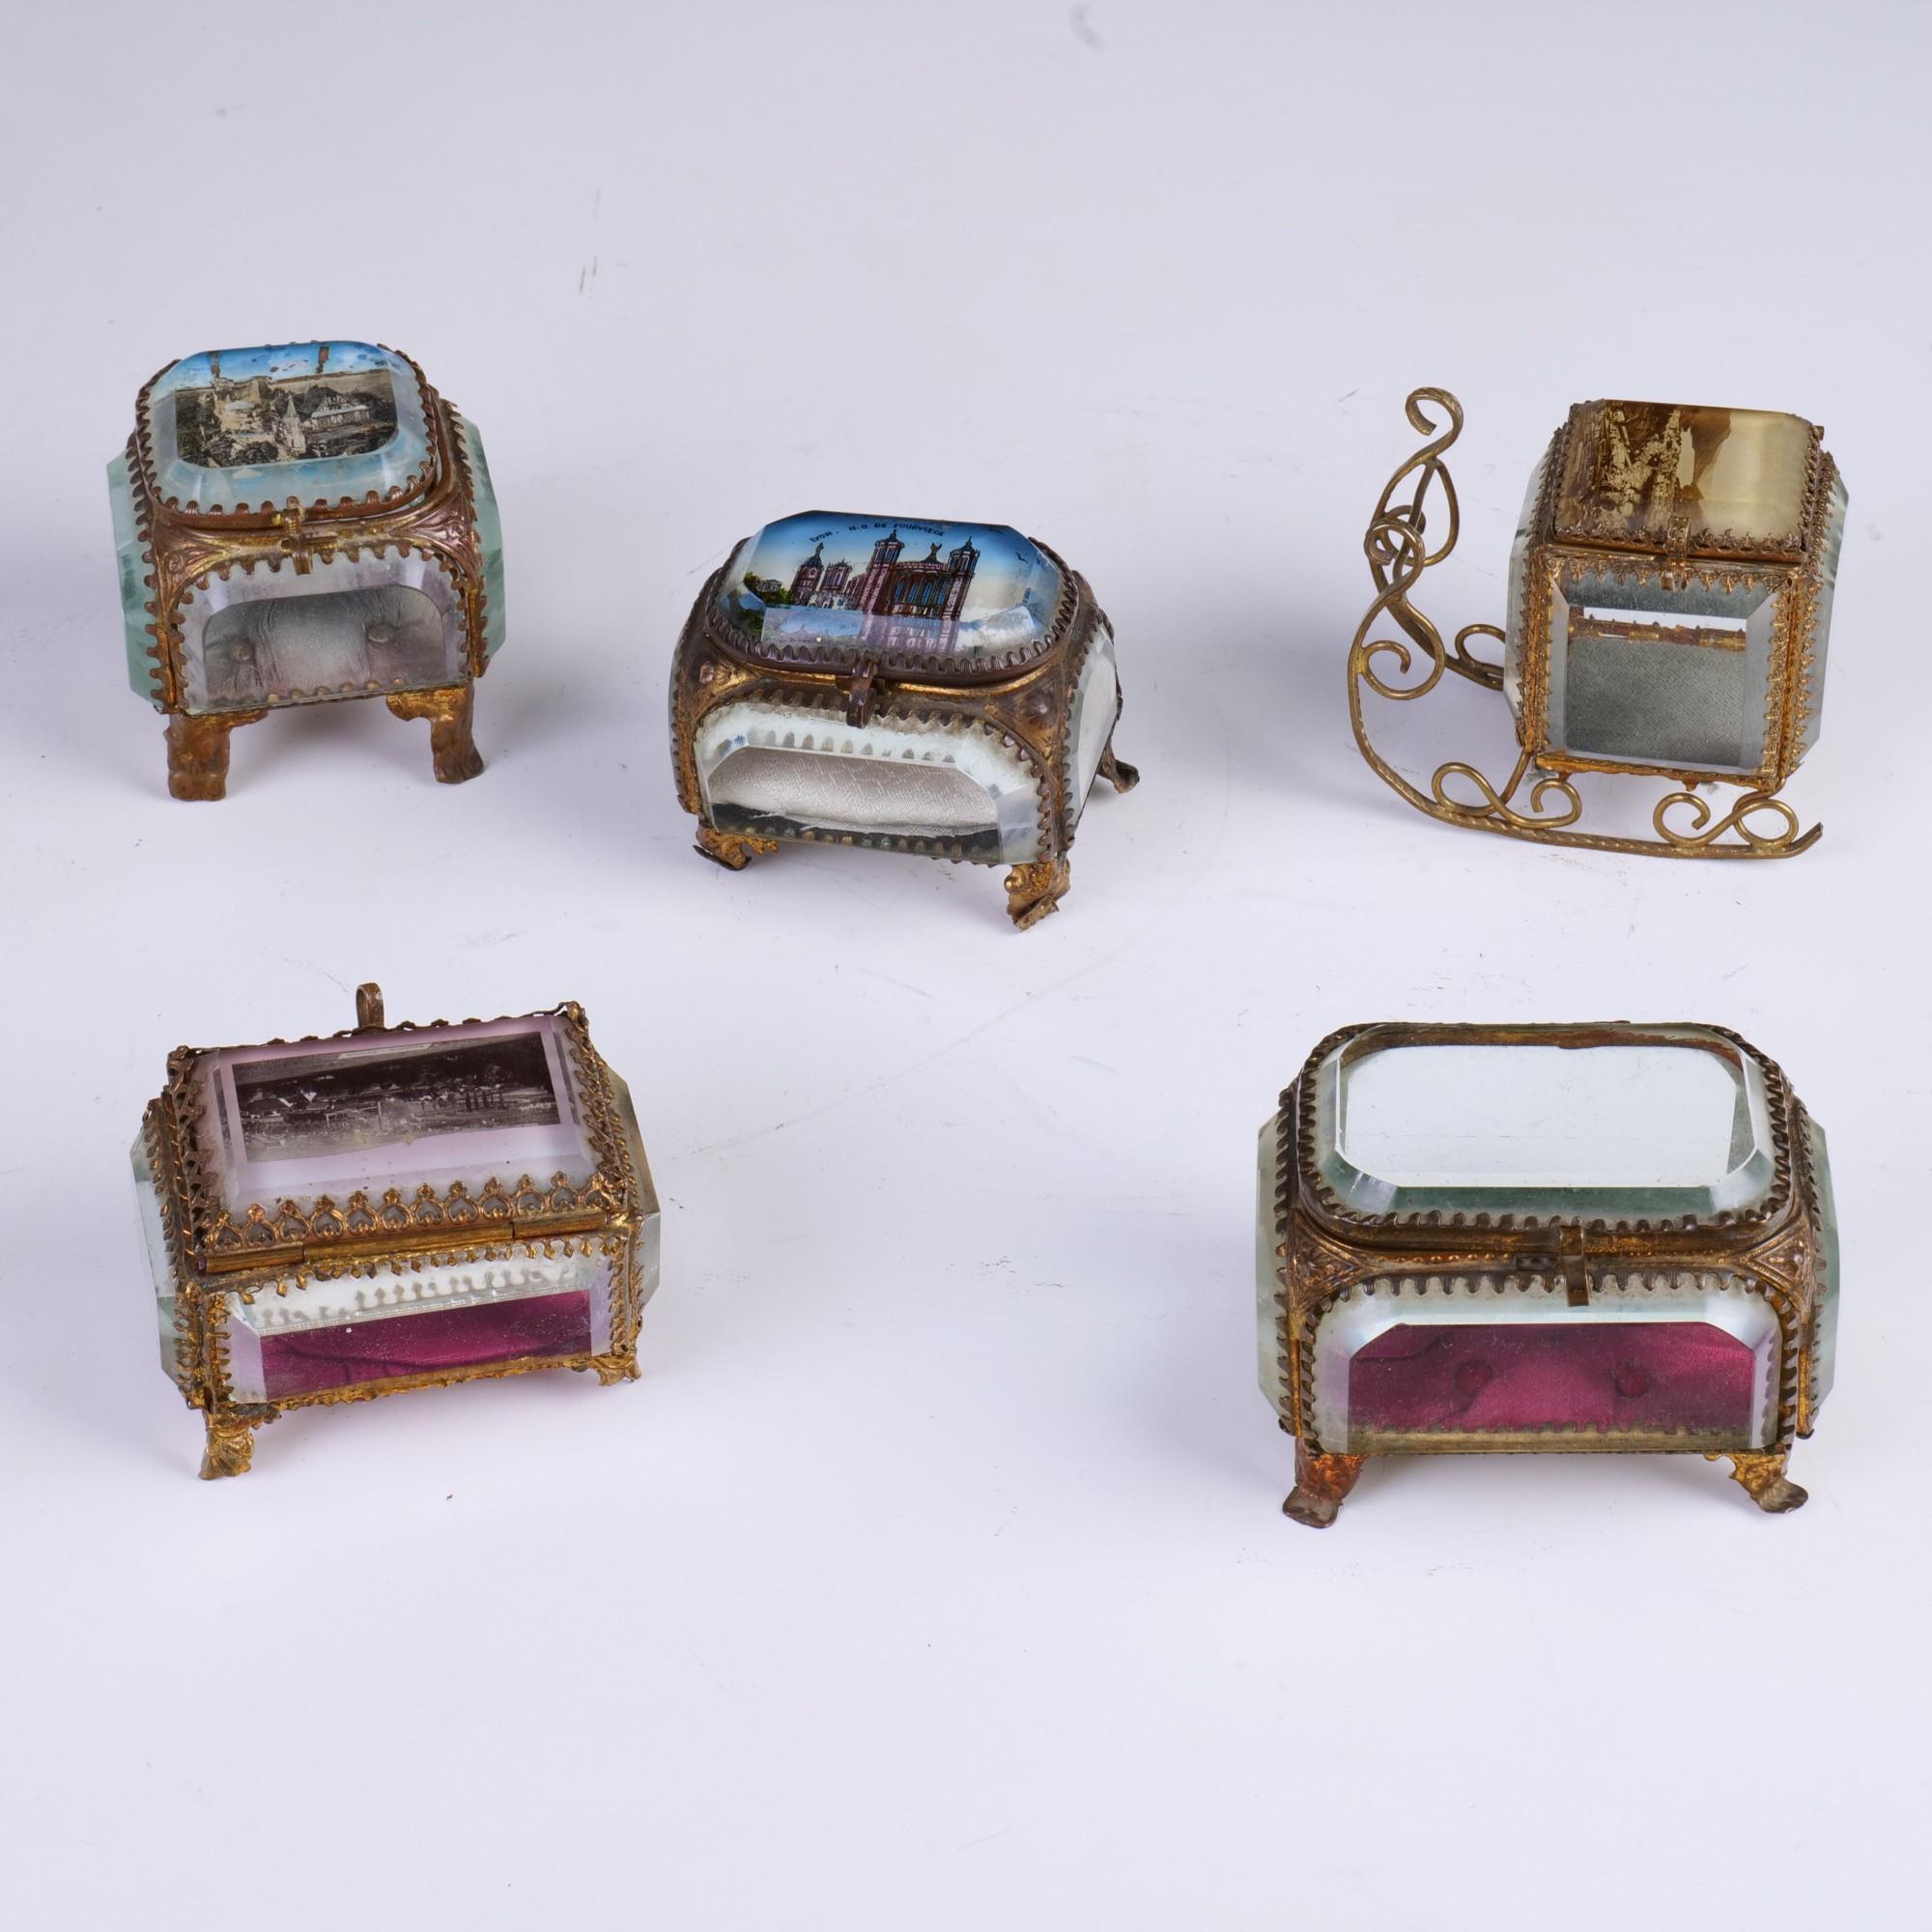 Set of 5 antique caskets from the 19th century from France.

dimensions:
1. 8,5 cm x 6.5 cm x 5 cm
2. 8 cm x 5 cm x 6 cm
3. 6.5 cm x 6.5 cm x 7 cm
4. 8.5 cm x 6.5 cm x 6 cm
5.. 7 cm x 6.5 cm x 7 cm.